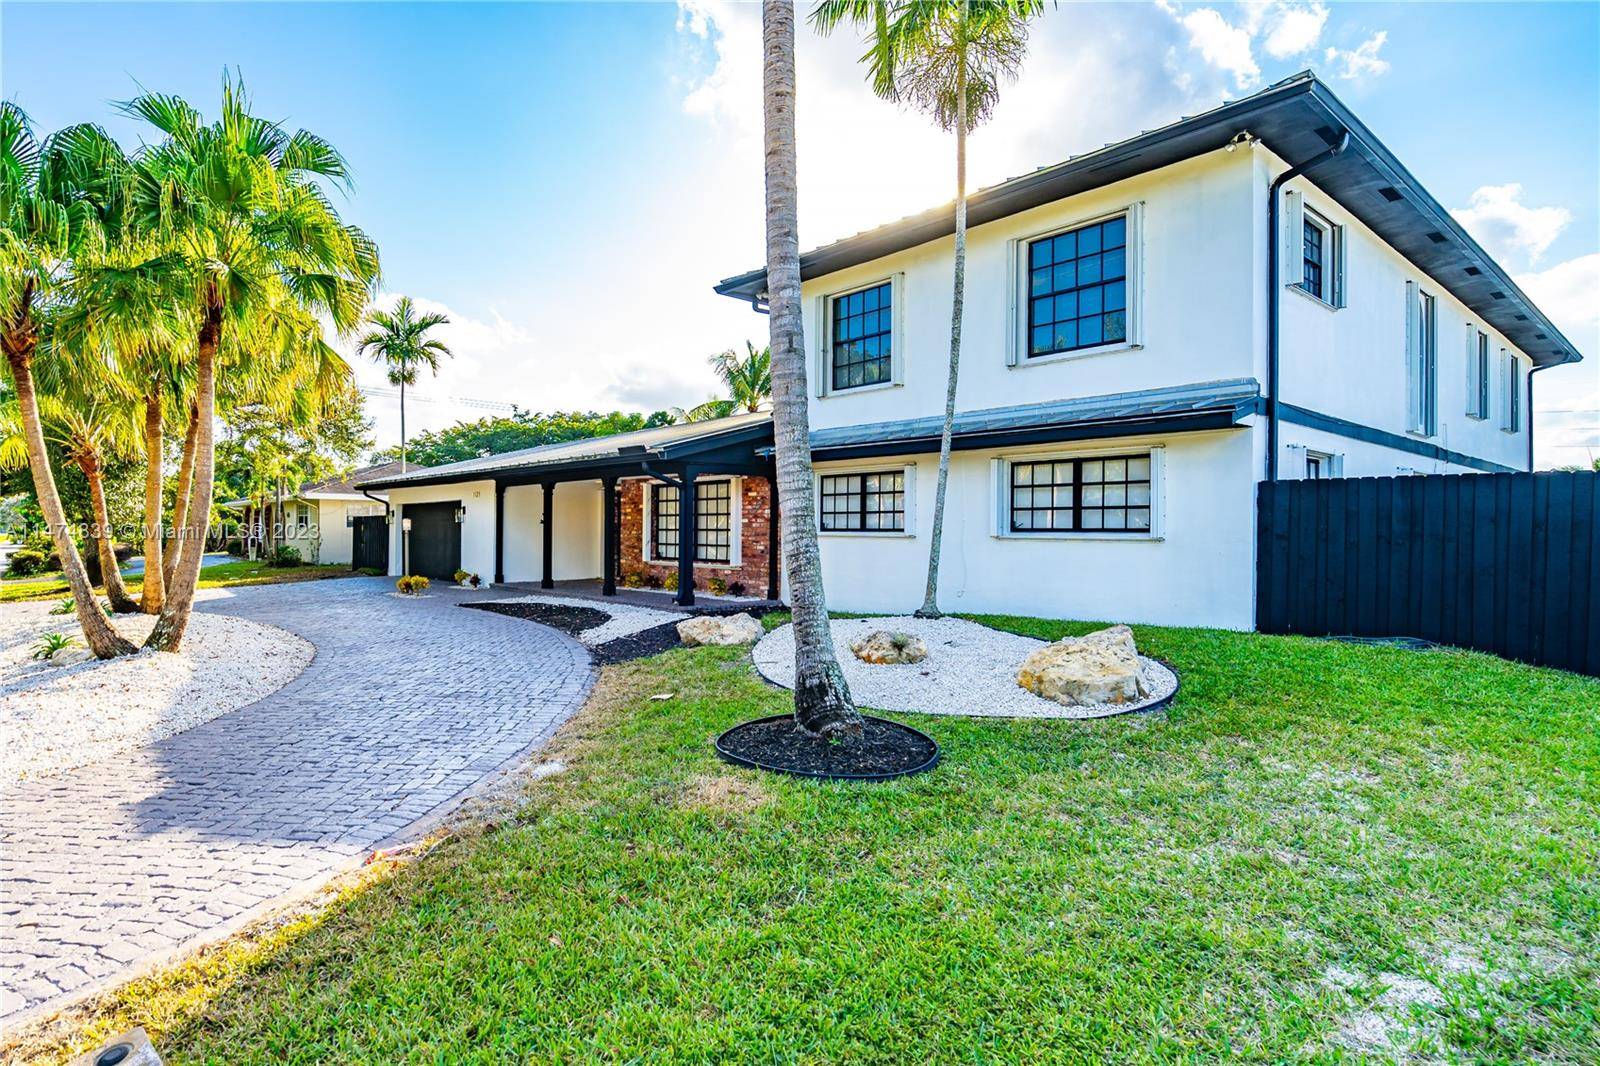 Large Estate home located in beautiful Plantation.